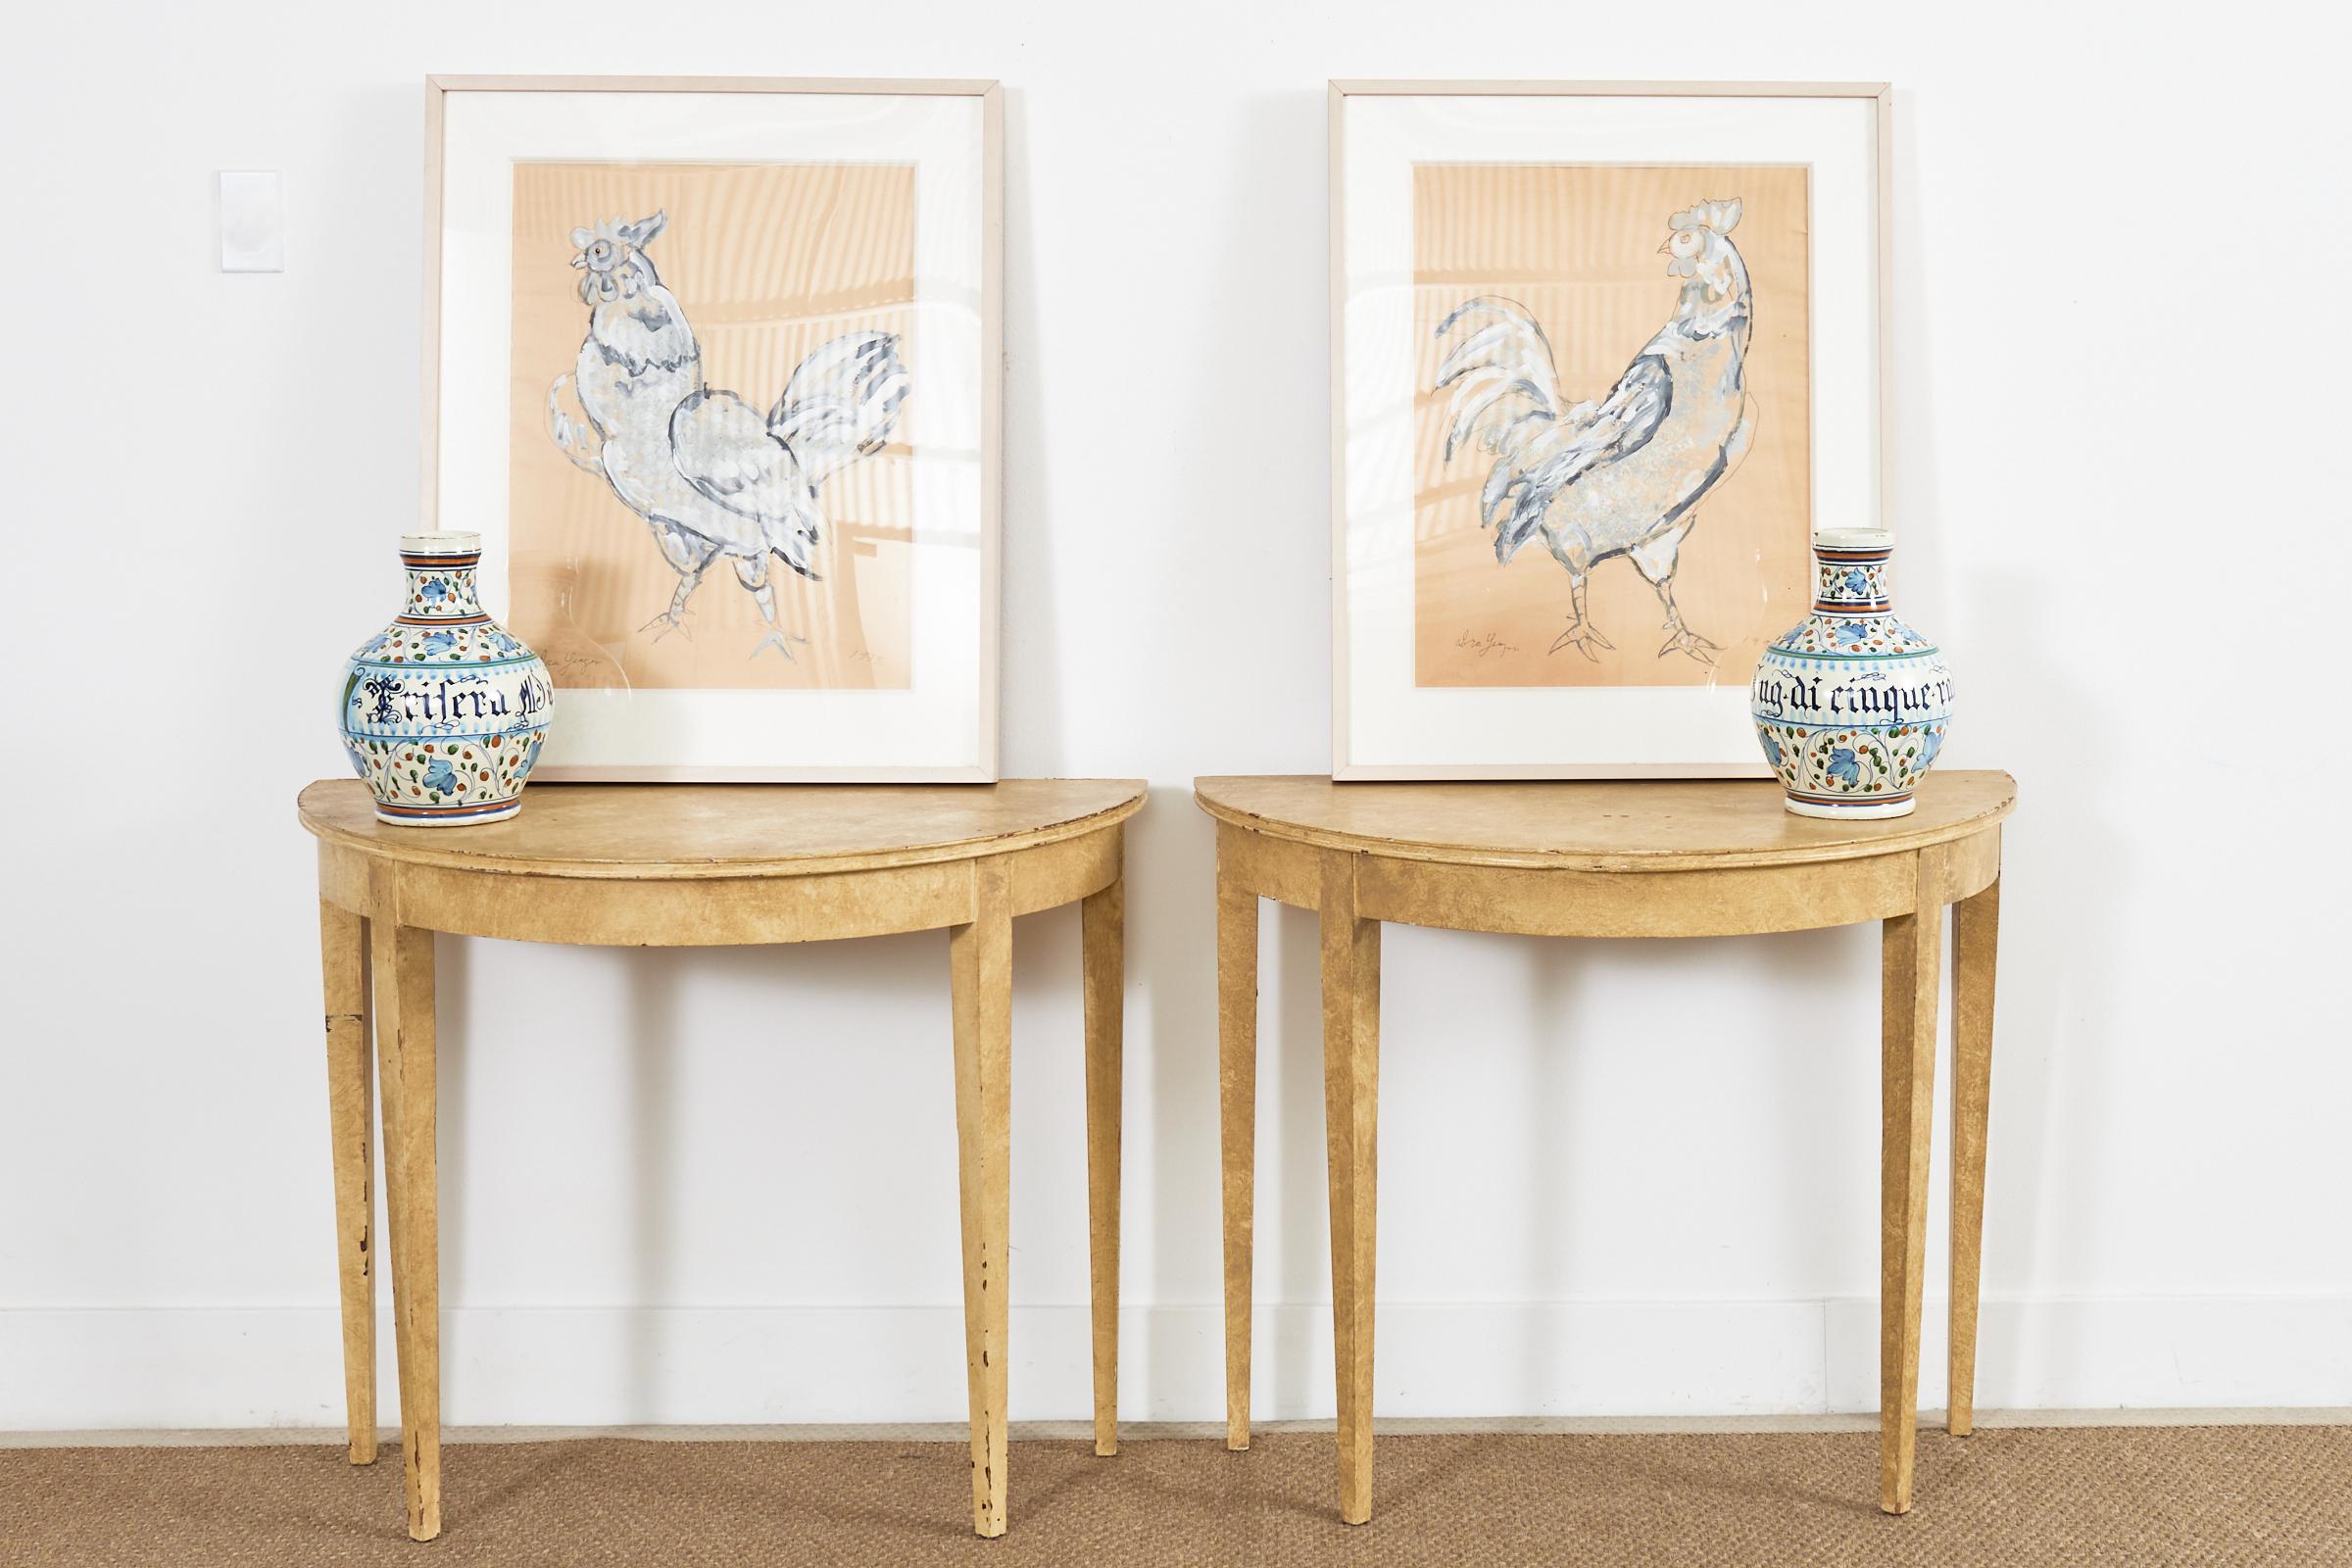 Charming pair of framed paintings of chickens or roosters mounted in acrylic and lacquered wood frames by Ira Yeager (American 1938-2022). Painted on beige Italian paper giving the paintings a country French provincial style he loved so much. Each